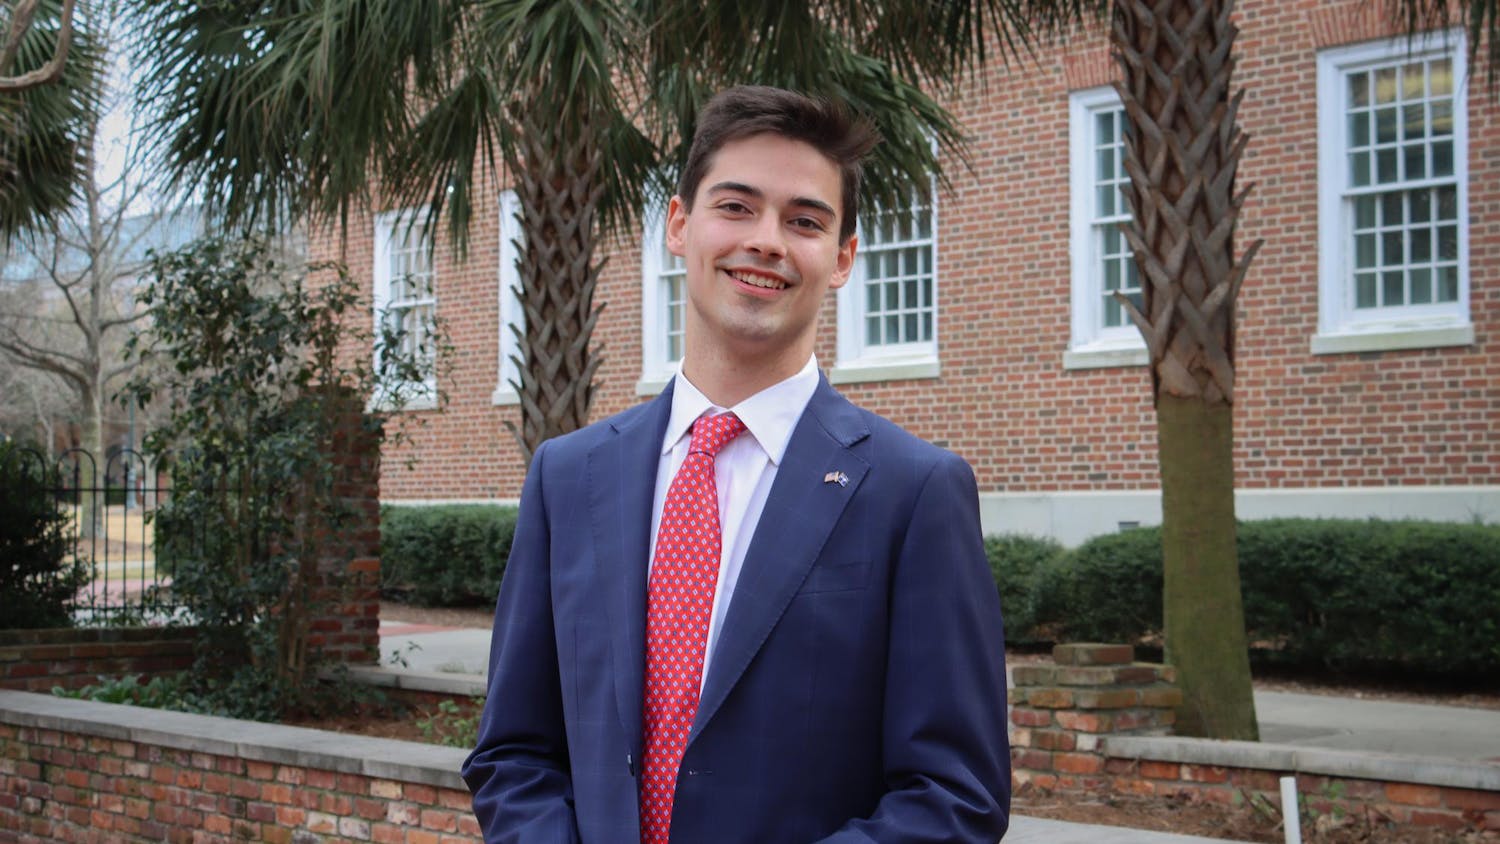 Student Body President candidate Patton Byars stands outside of USC's School of Journalism and Mass Communications for a posed photo on Feb. 9, 2024. Byars is running on a ballot with current student body member Courtney Tkacs for president and vice president, respectively.